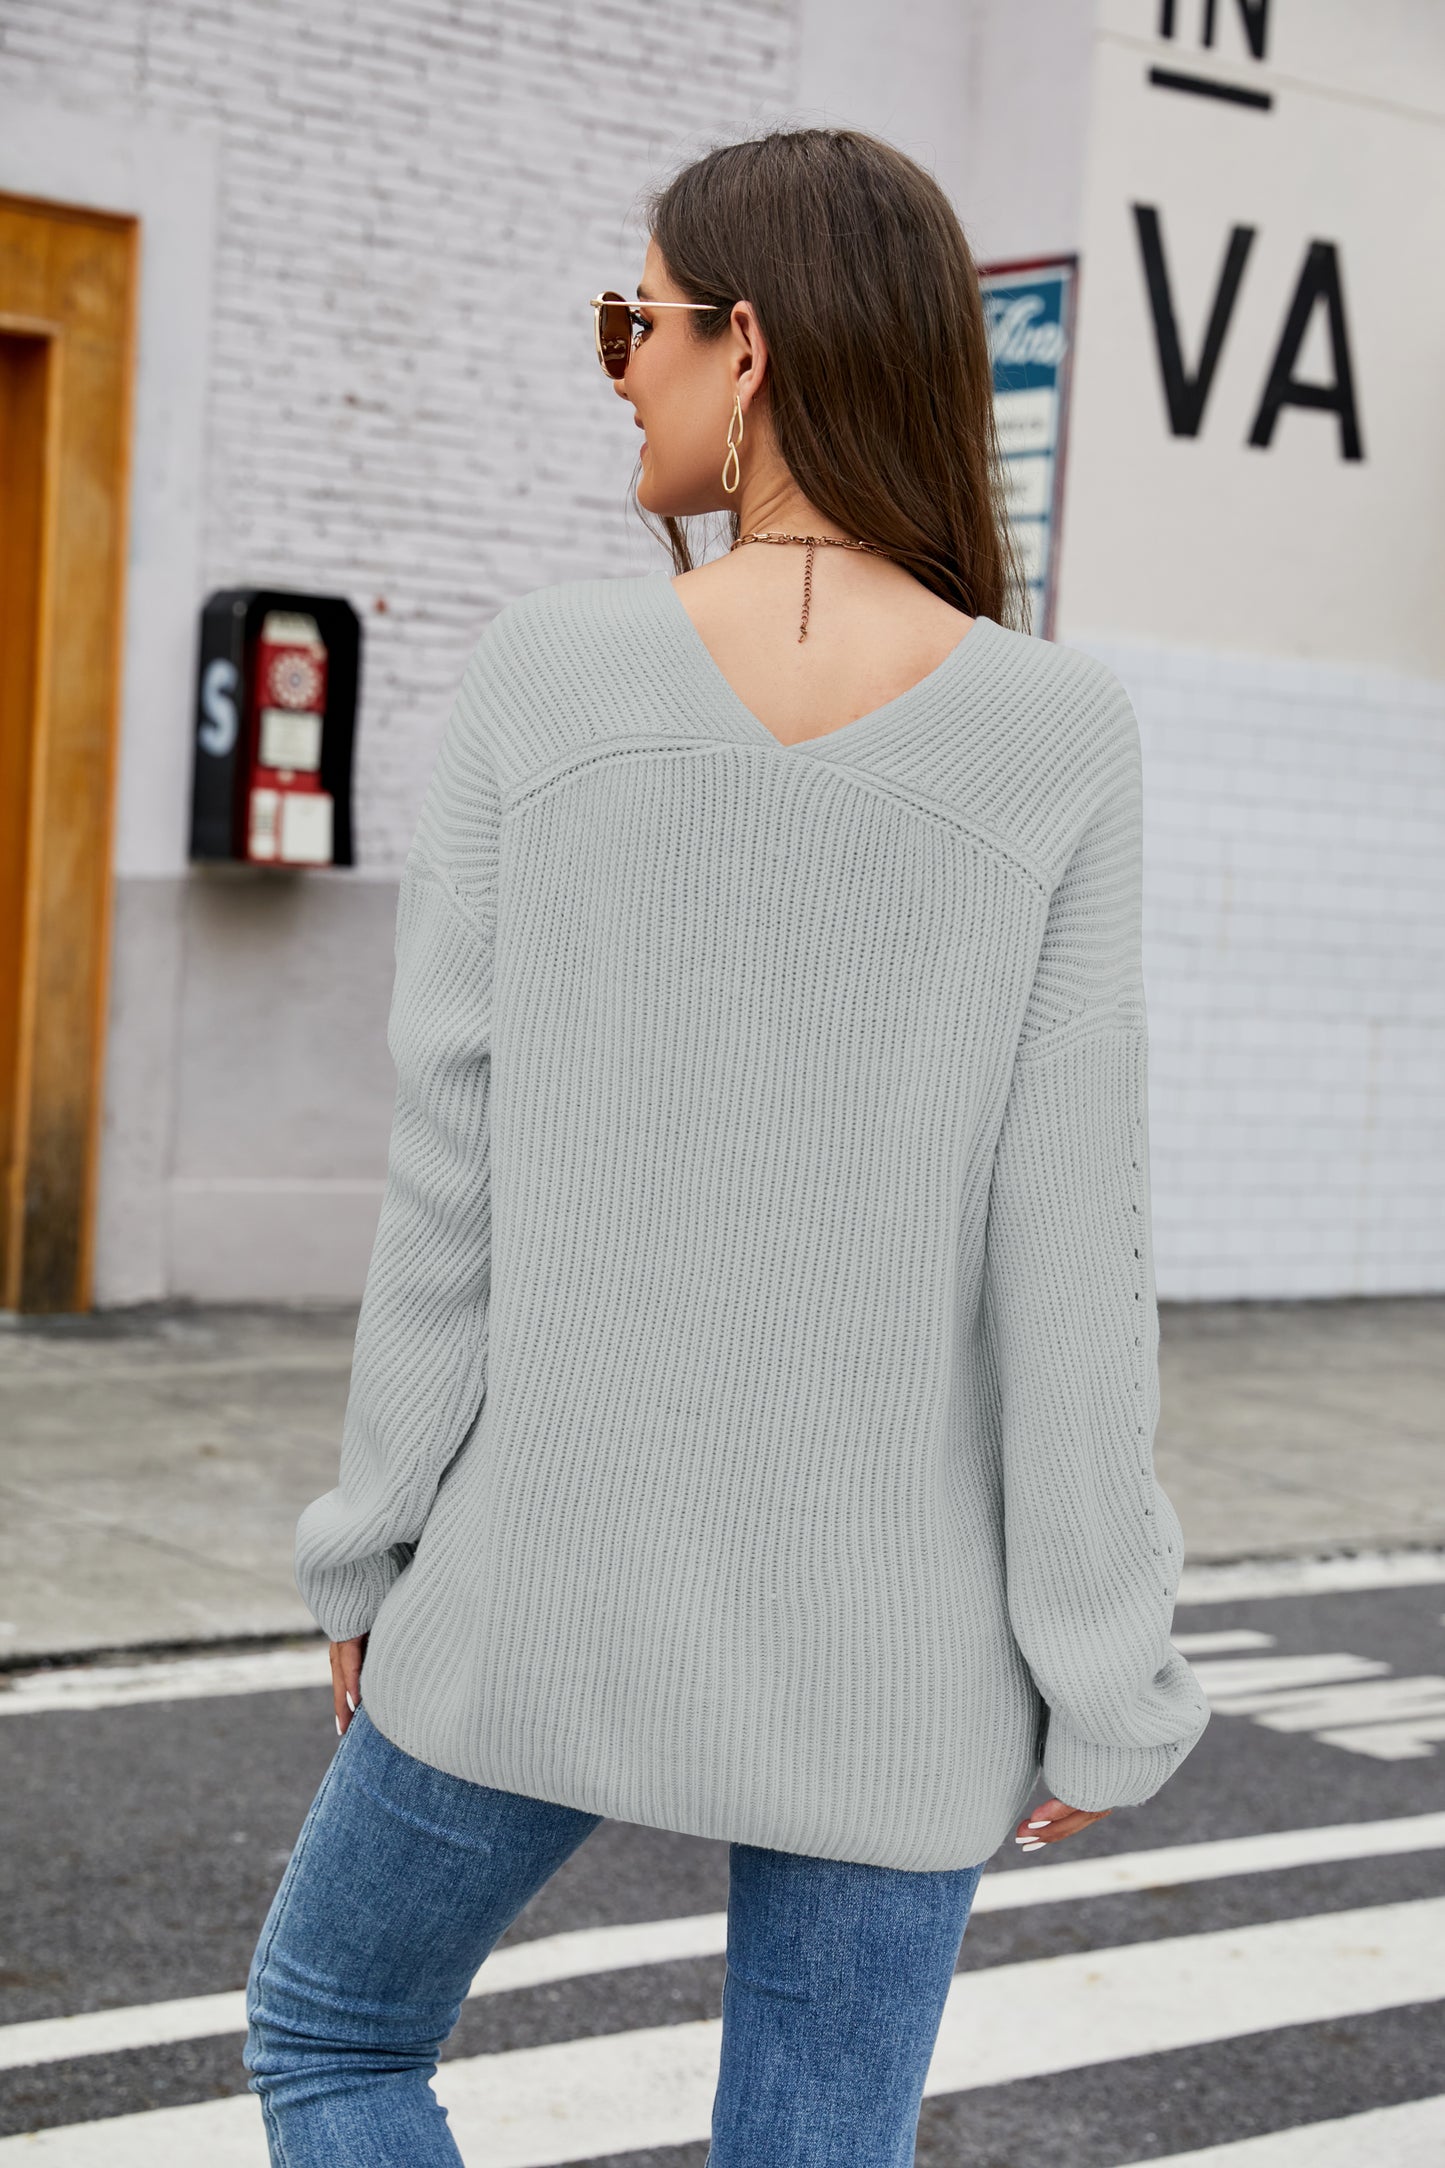 Women Clothing V Neck Casual Pullover Women Loose Long Sleeve Sweater